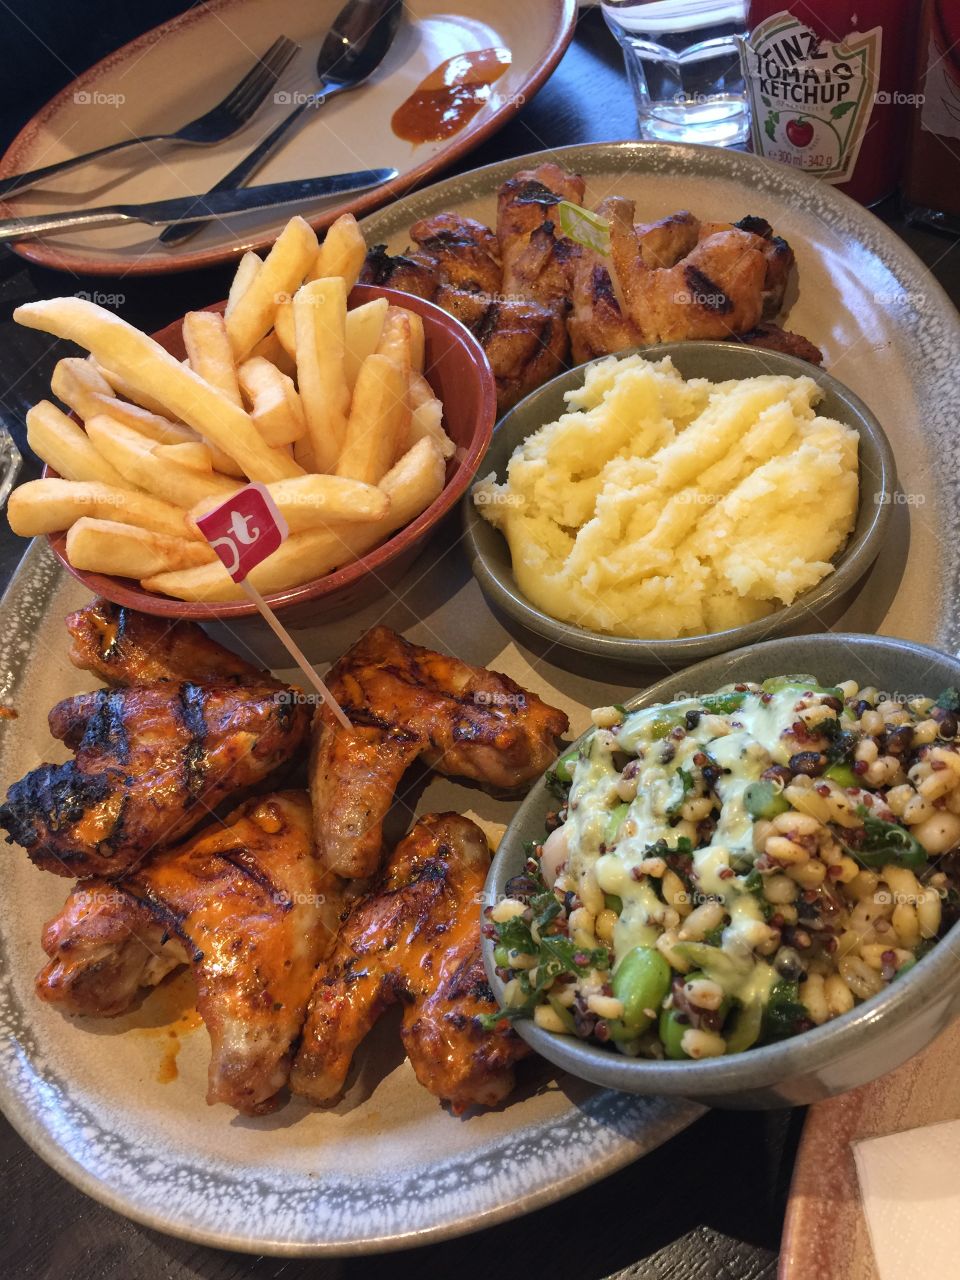 Nando chicken wing and fries 